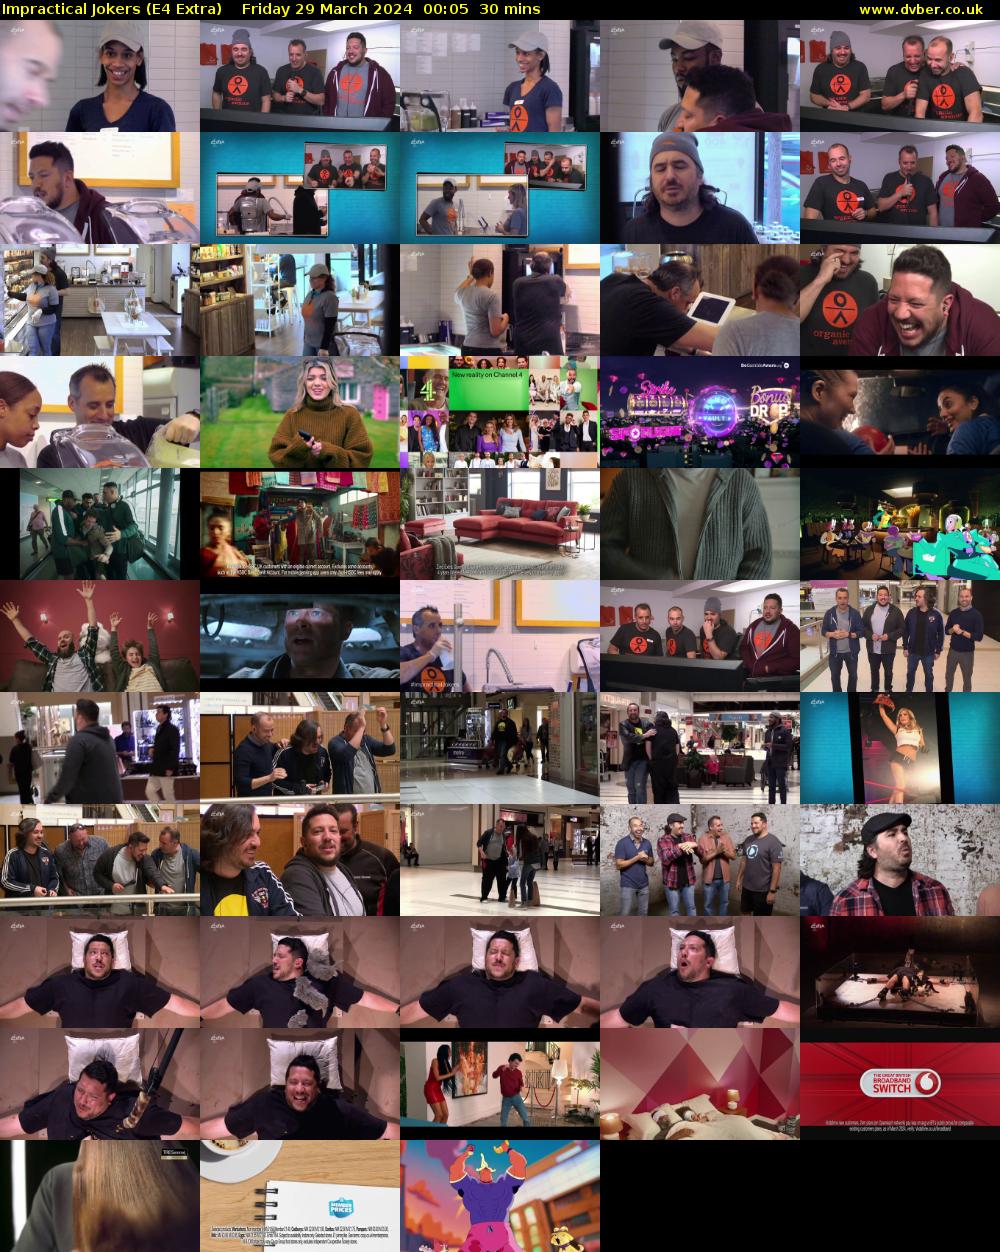 Impractical Jokers (E4 Extra) Friday 29 March 2024 00:05 - 00:35